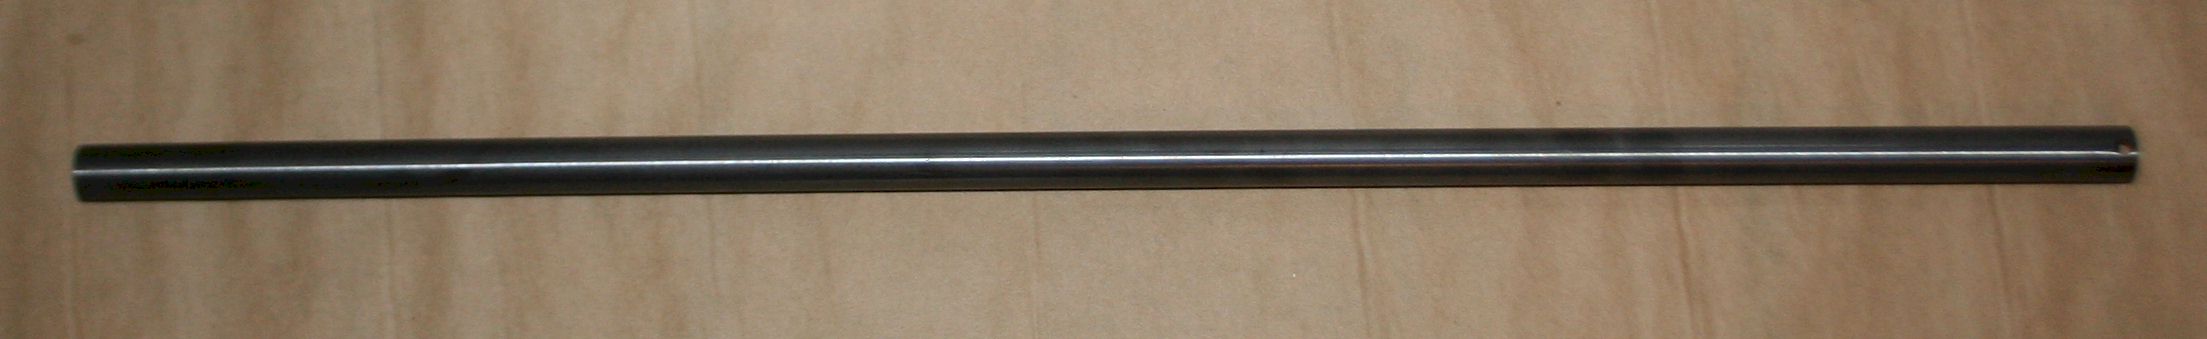 Magazine tube - LARGE calibers Winchester lever action 1866, 1873, 1892, 1894 Uberti and Marlin